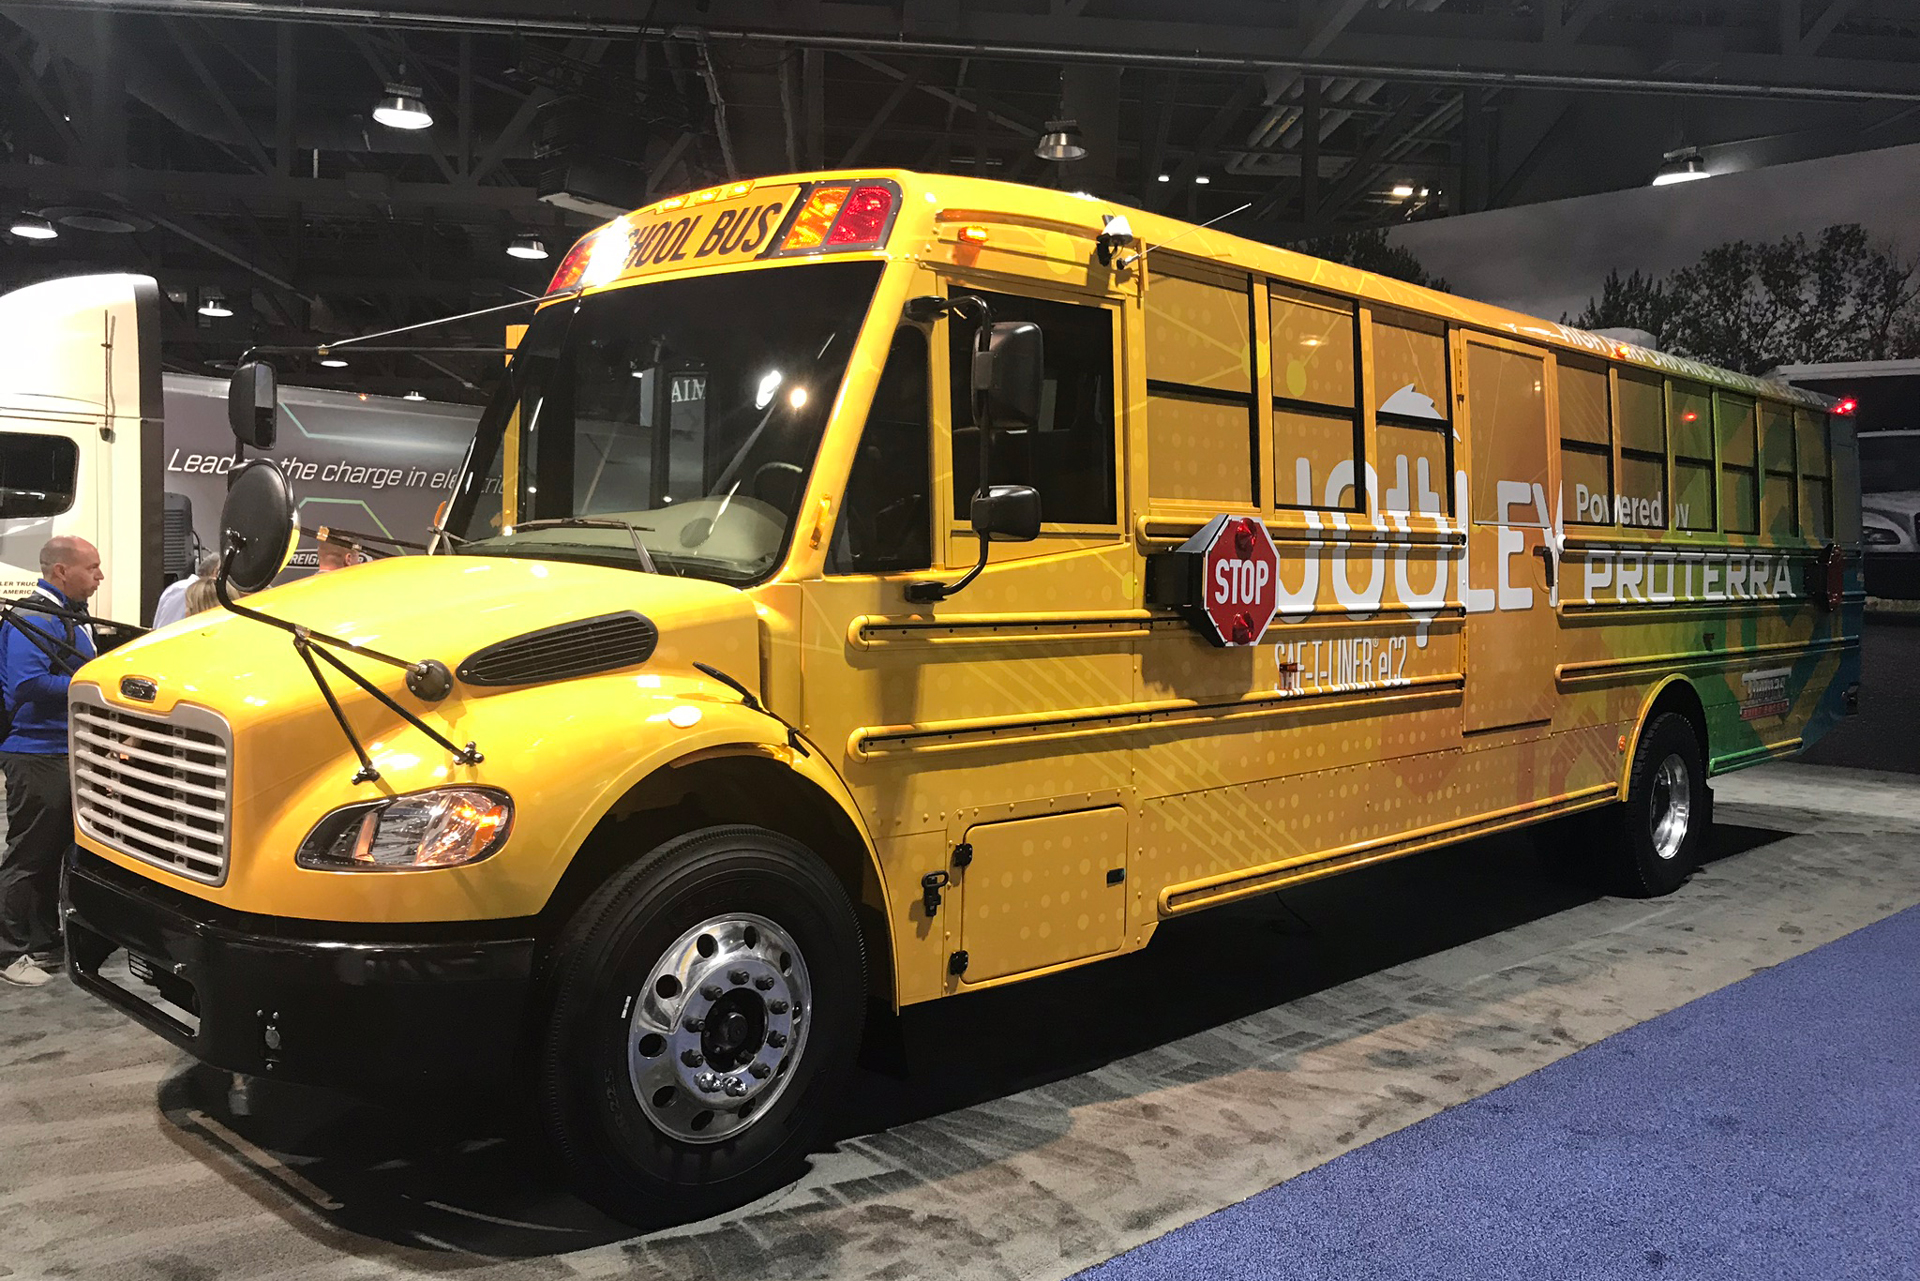 Michigan Welcomes First Electric School Buses - School Transportation News